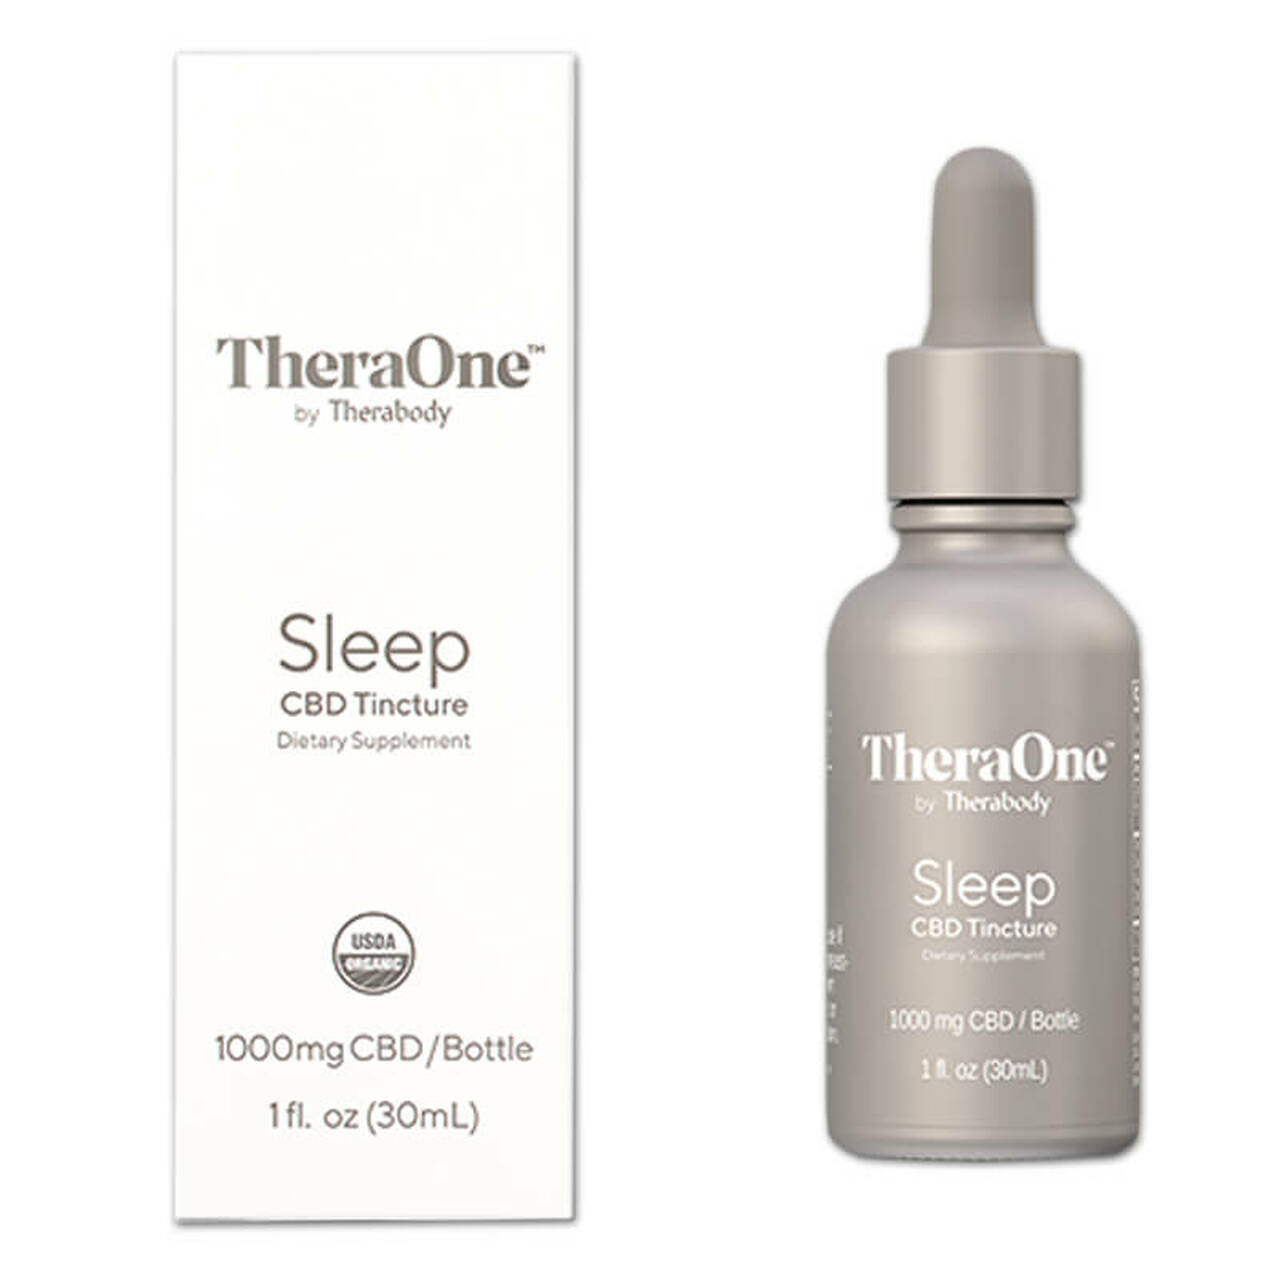 thumbnail CBD Sleep Tincture by TheraOne by Therabody